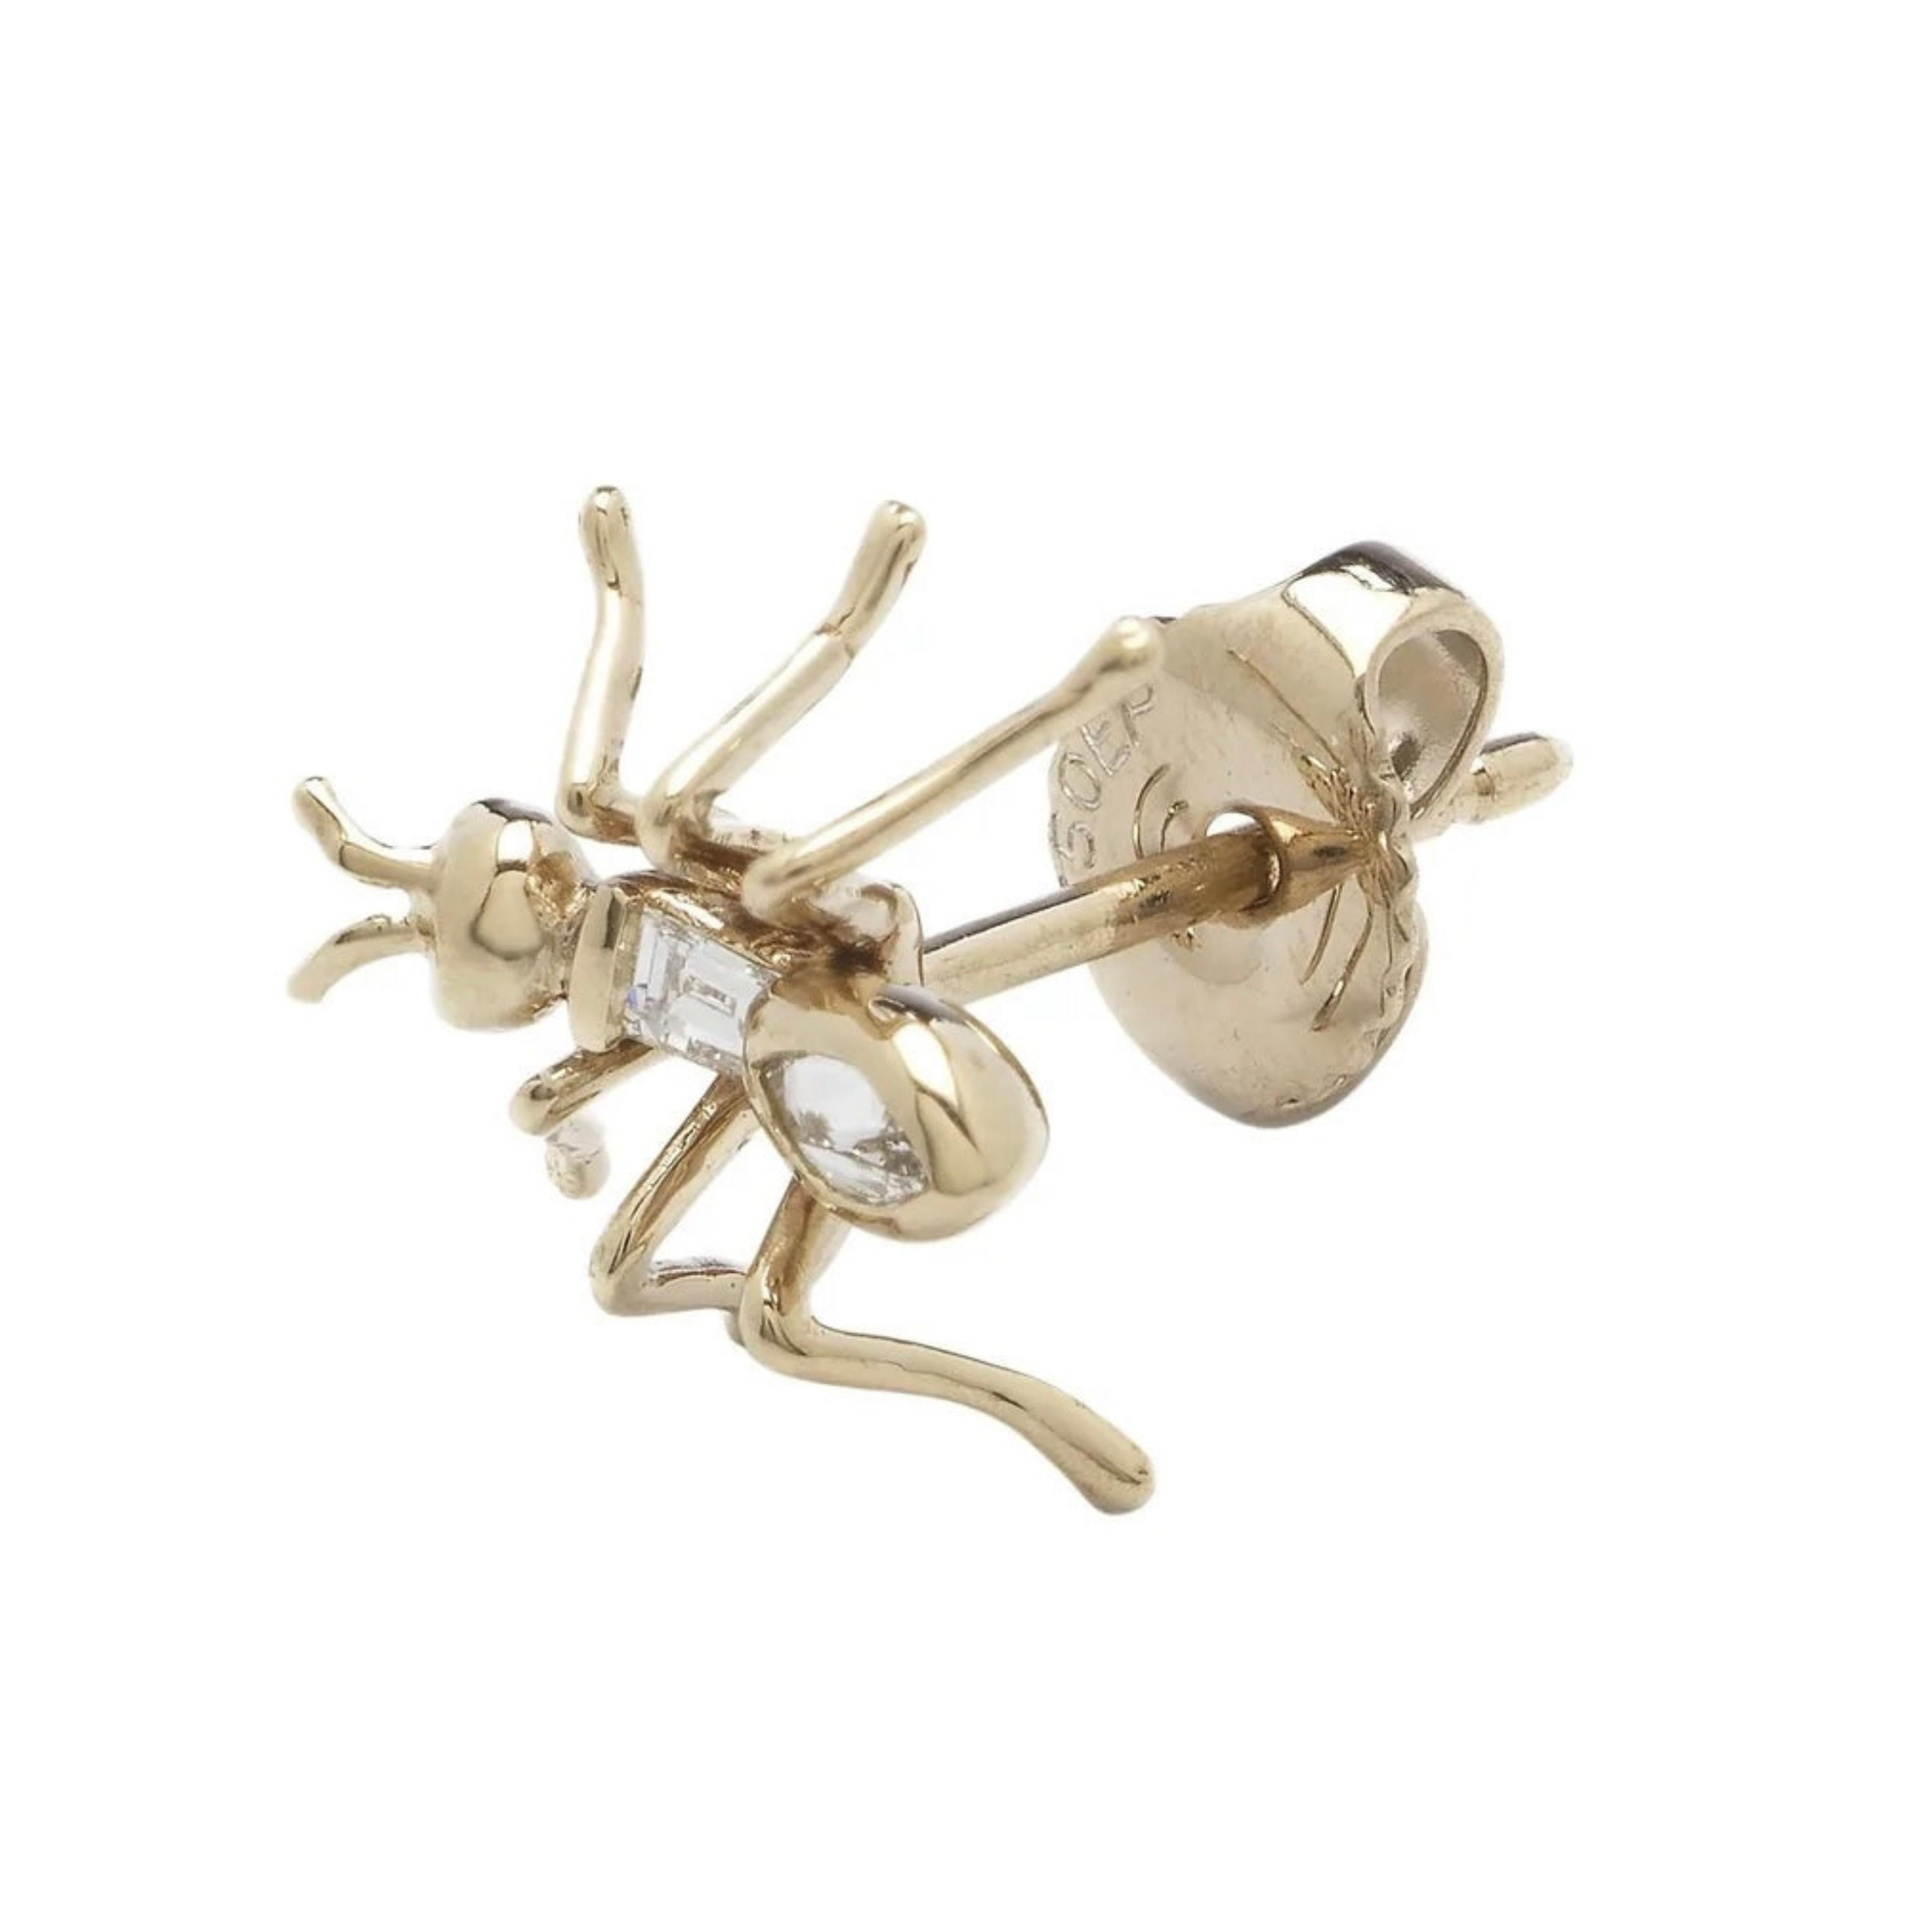 Bibi van der Velden Ant Single Stud Earring - White Diamond. Sculptural single earring in the shape of an ant with two white diamond stones forming the body. Earring shown from the side view.